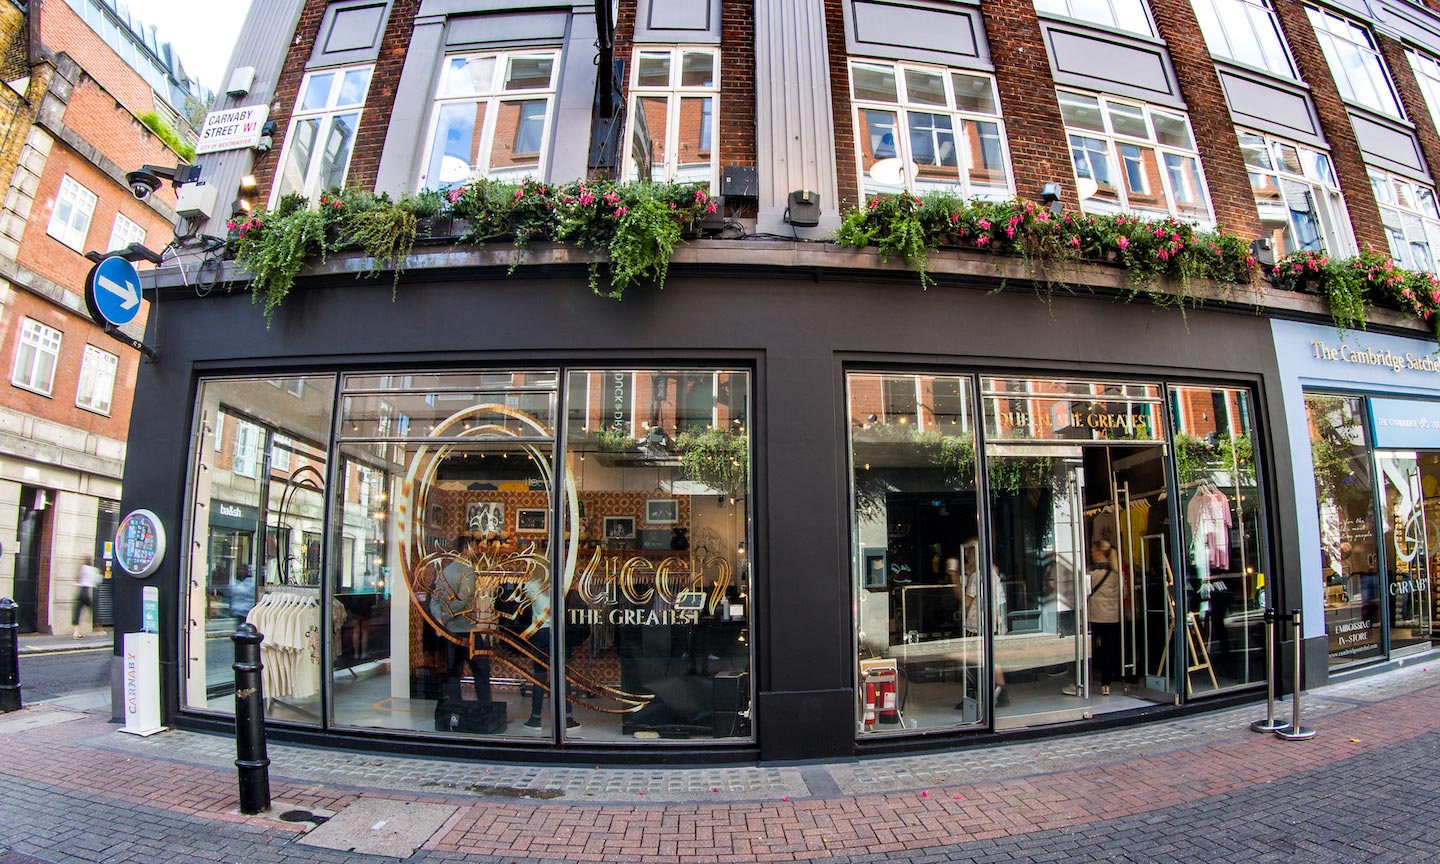 Explore The Immersive Queen Pop-Up Store On London's Carnaby Street